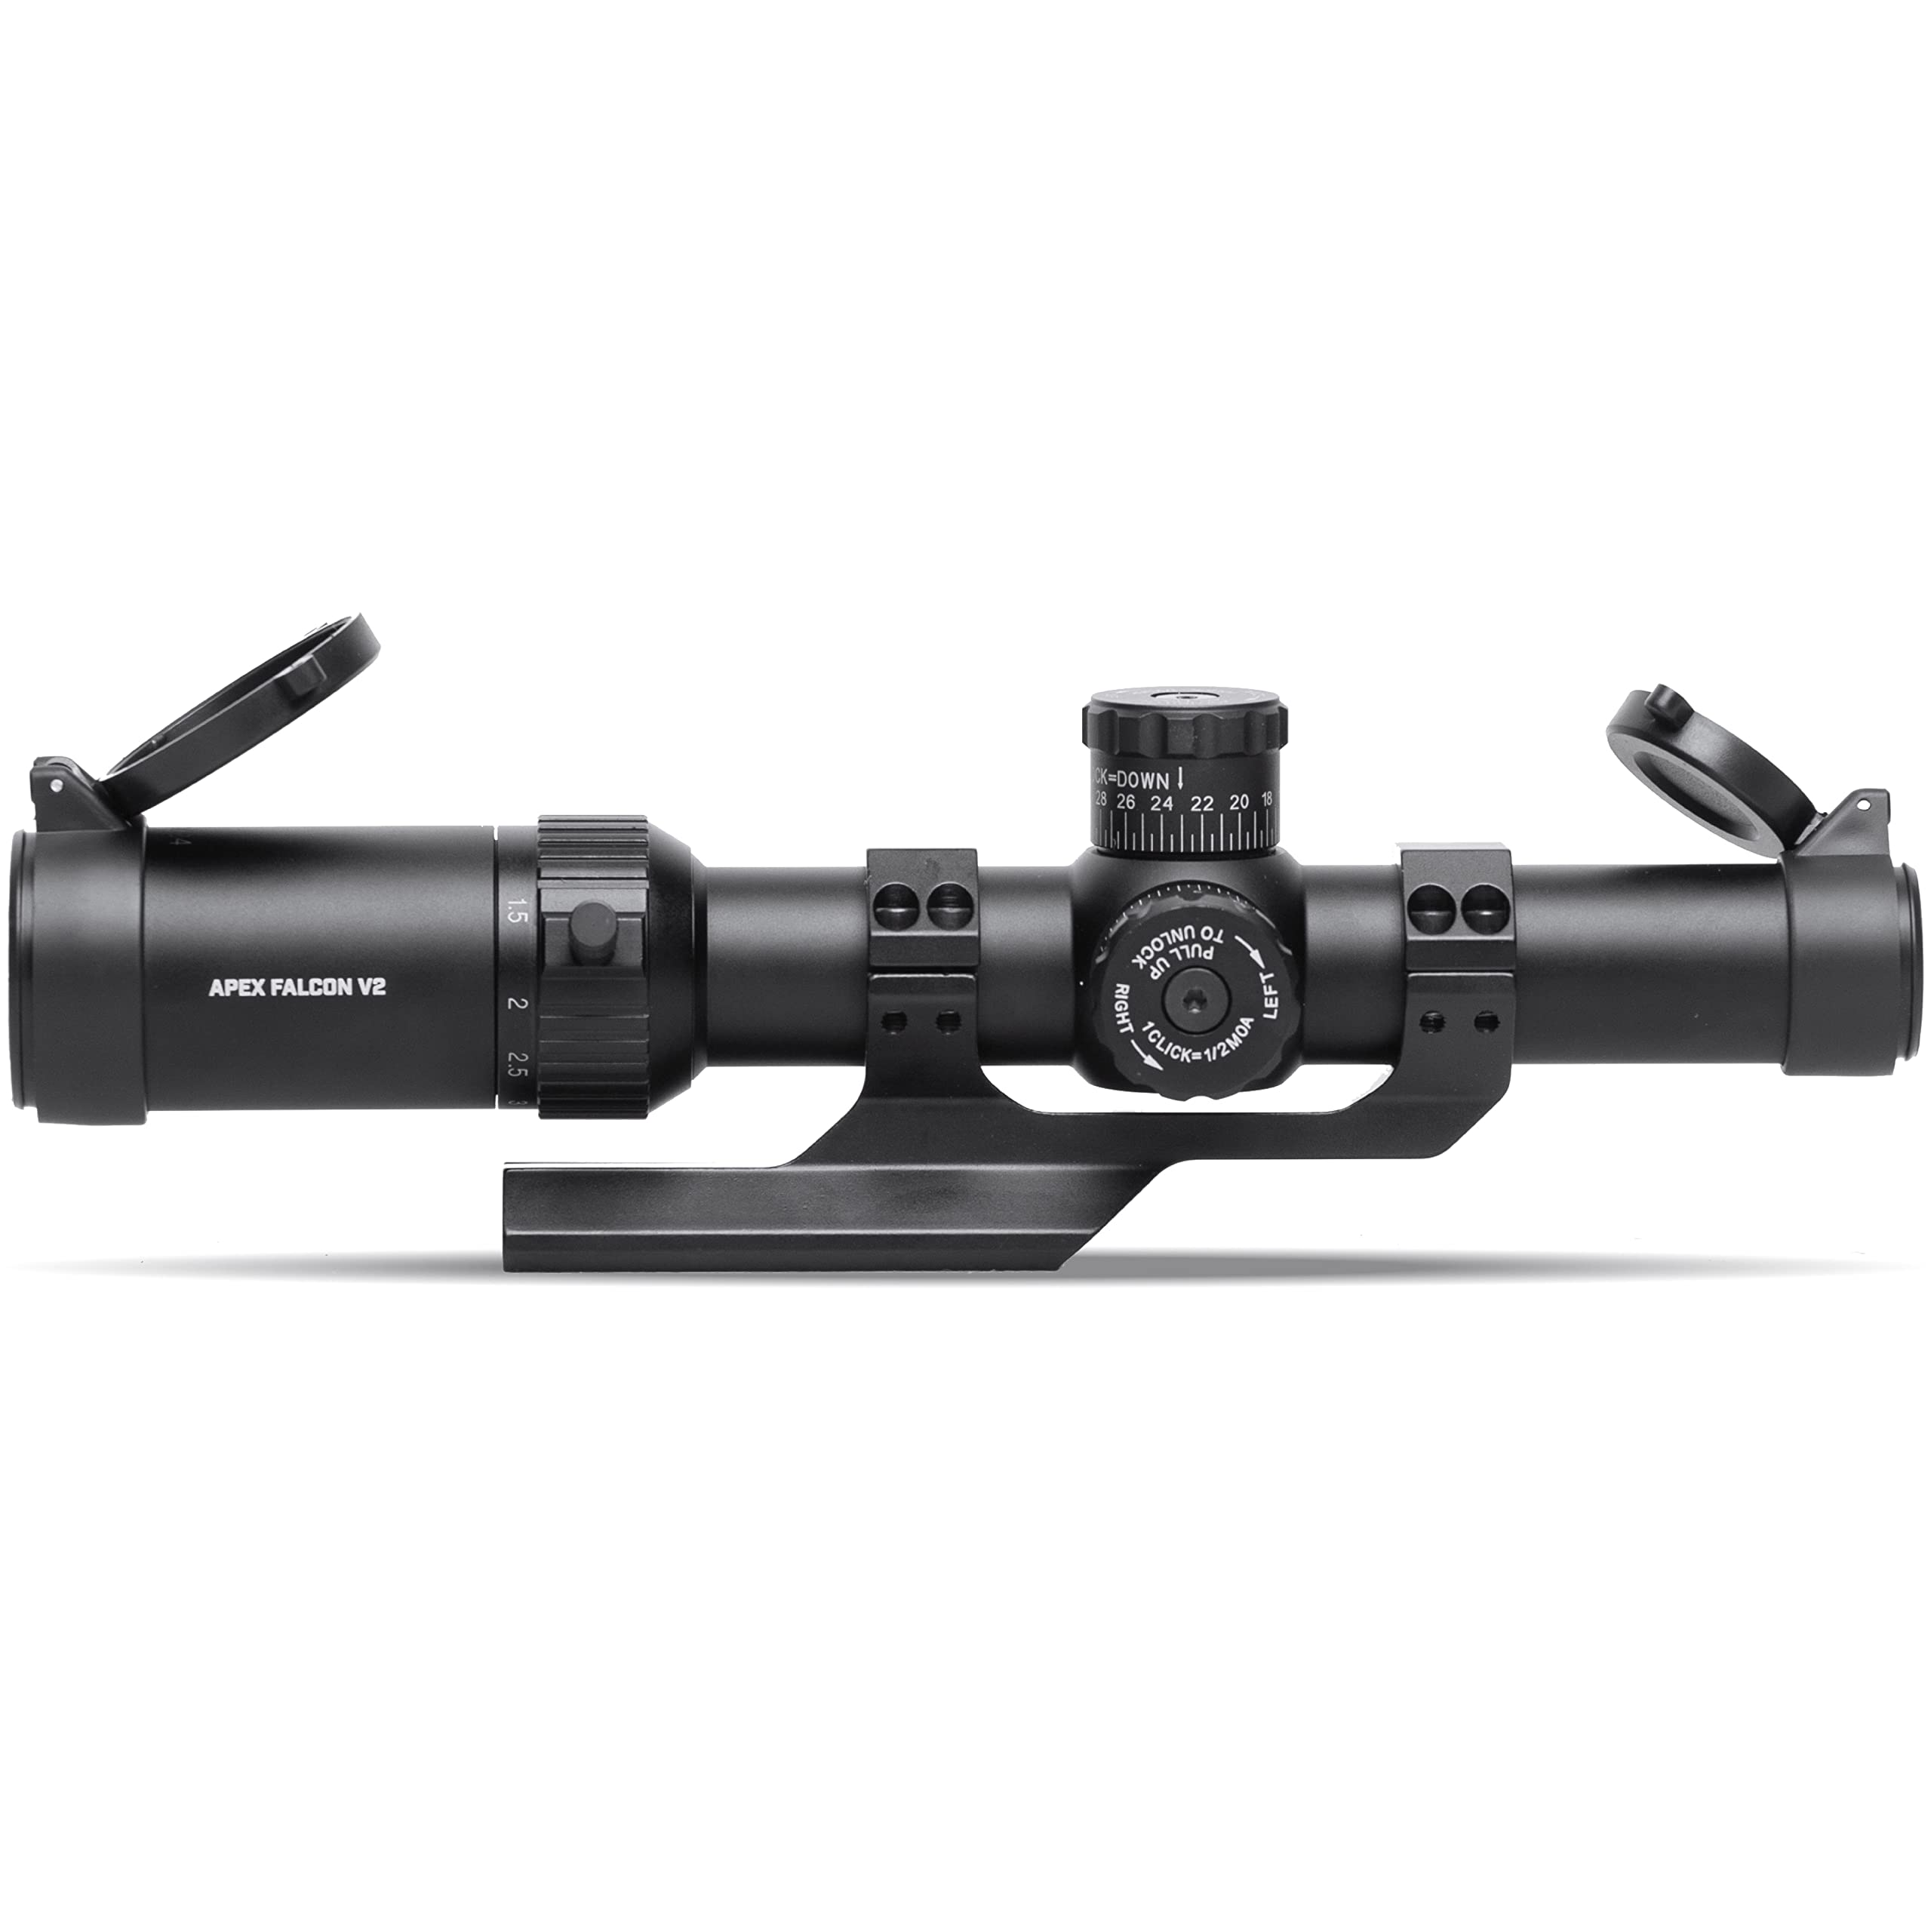 Tacticon APEX Falcon V2 1-4x24mm LPVO Scope with Cantilever Mount | Disabled Combat Veteran Owned Company | Lower Power Variable Optic with Illuminated Red Mil-Dot Reticle for Rifle